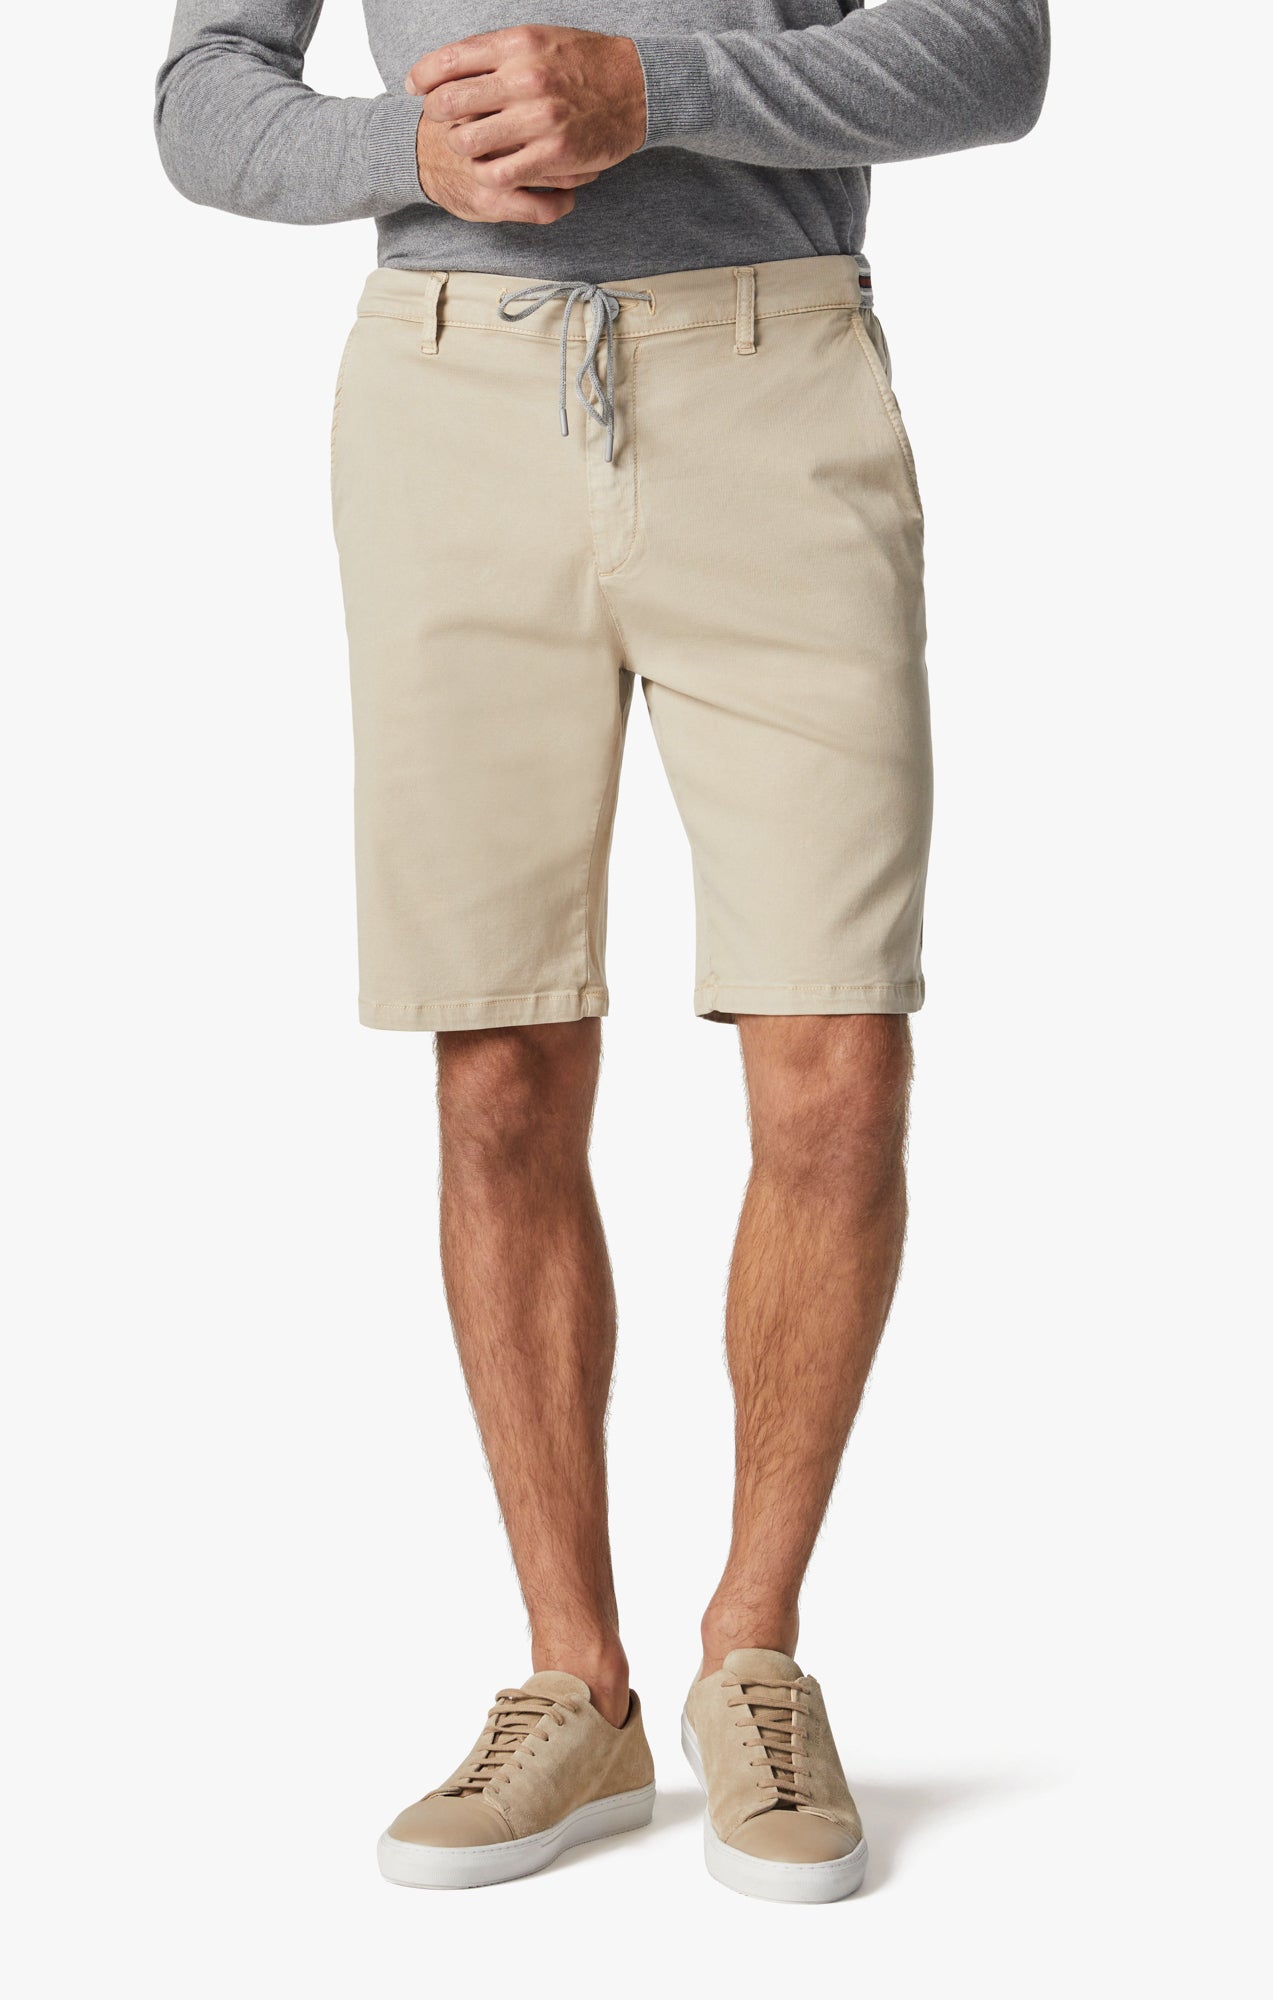 Ravenna Drawstring Shorts In Sand Soft Touch Image 2